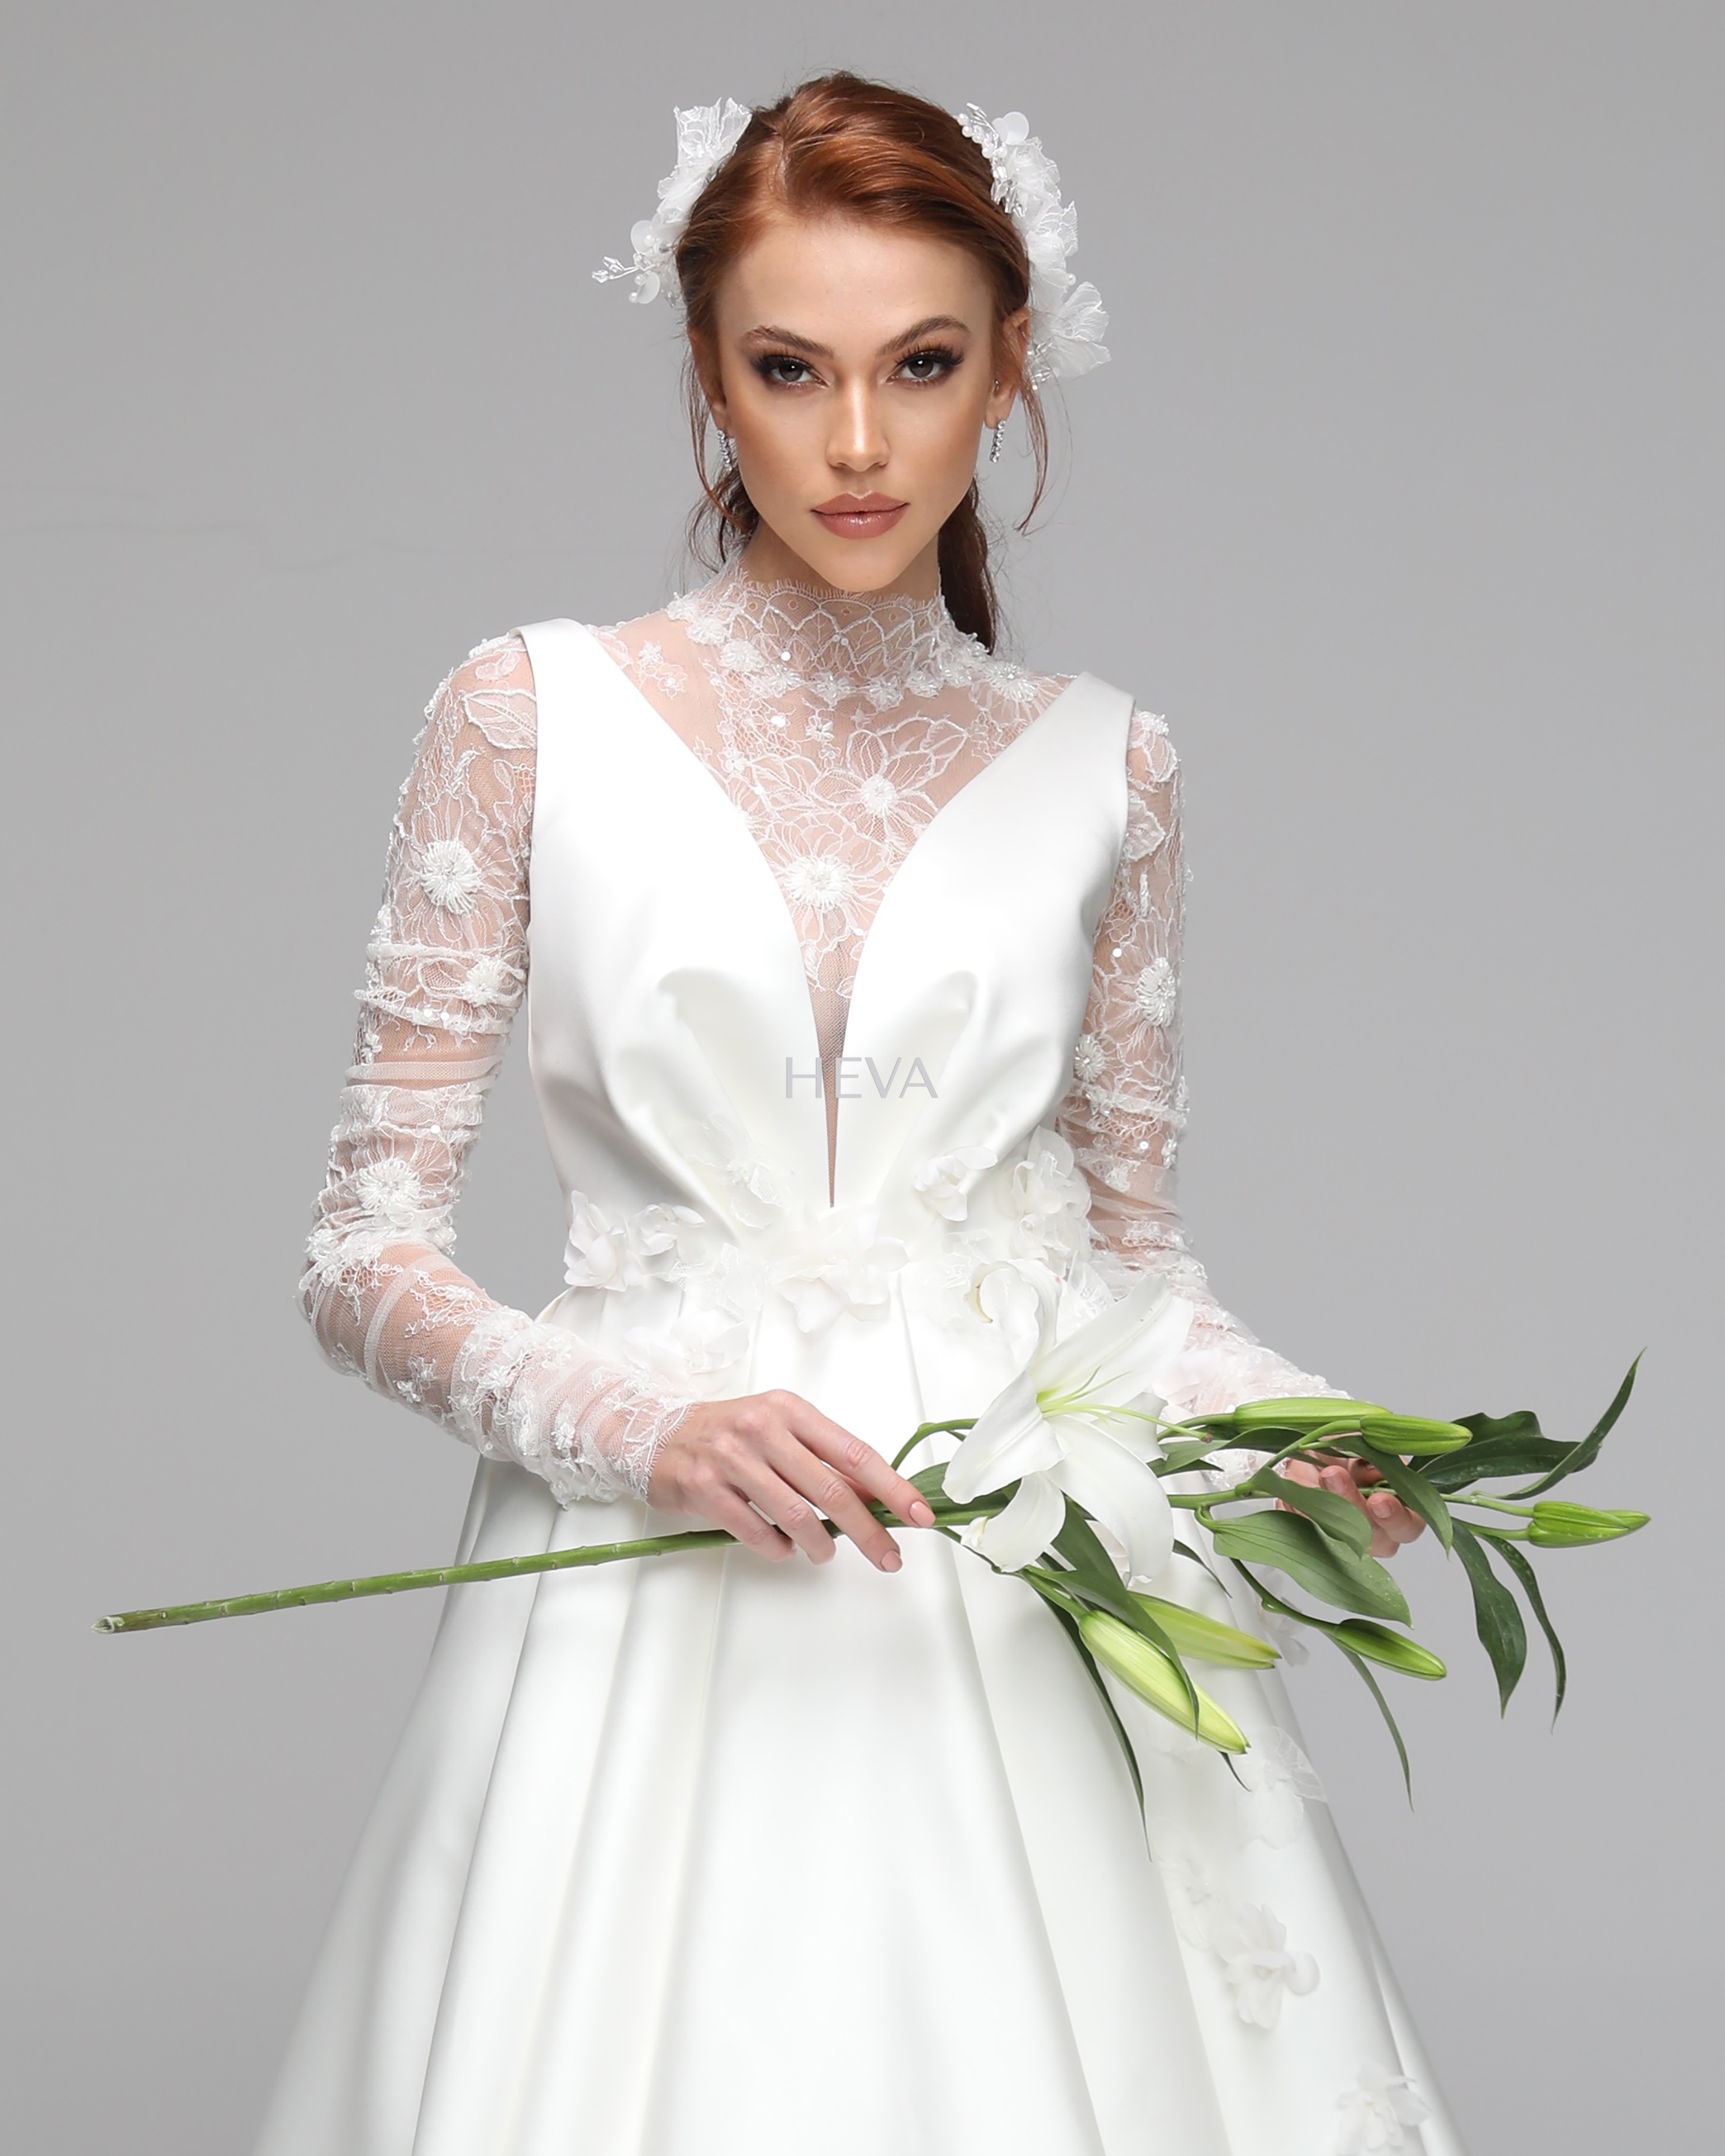 HV22016 - Long-Sleeved, Sheer Satin Bodice Wedding Gown with Lace-Trimmed, Tulle Skirt and Handcrafted Silk Flowers 